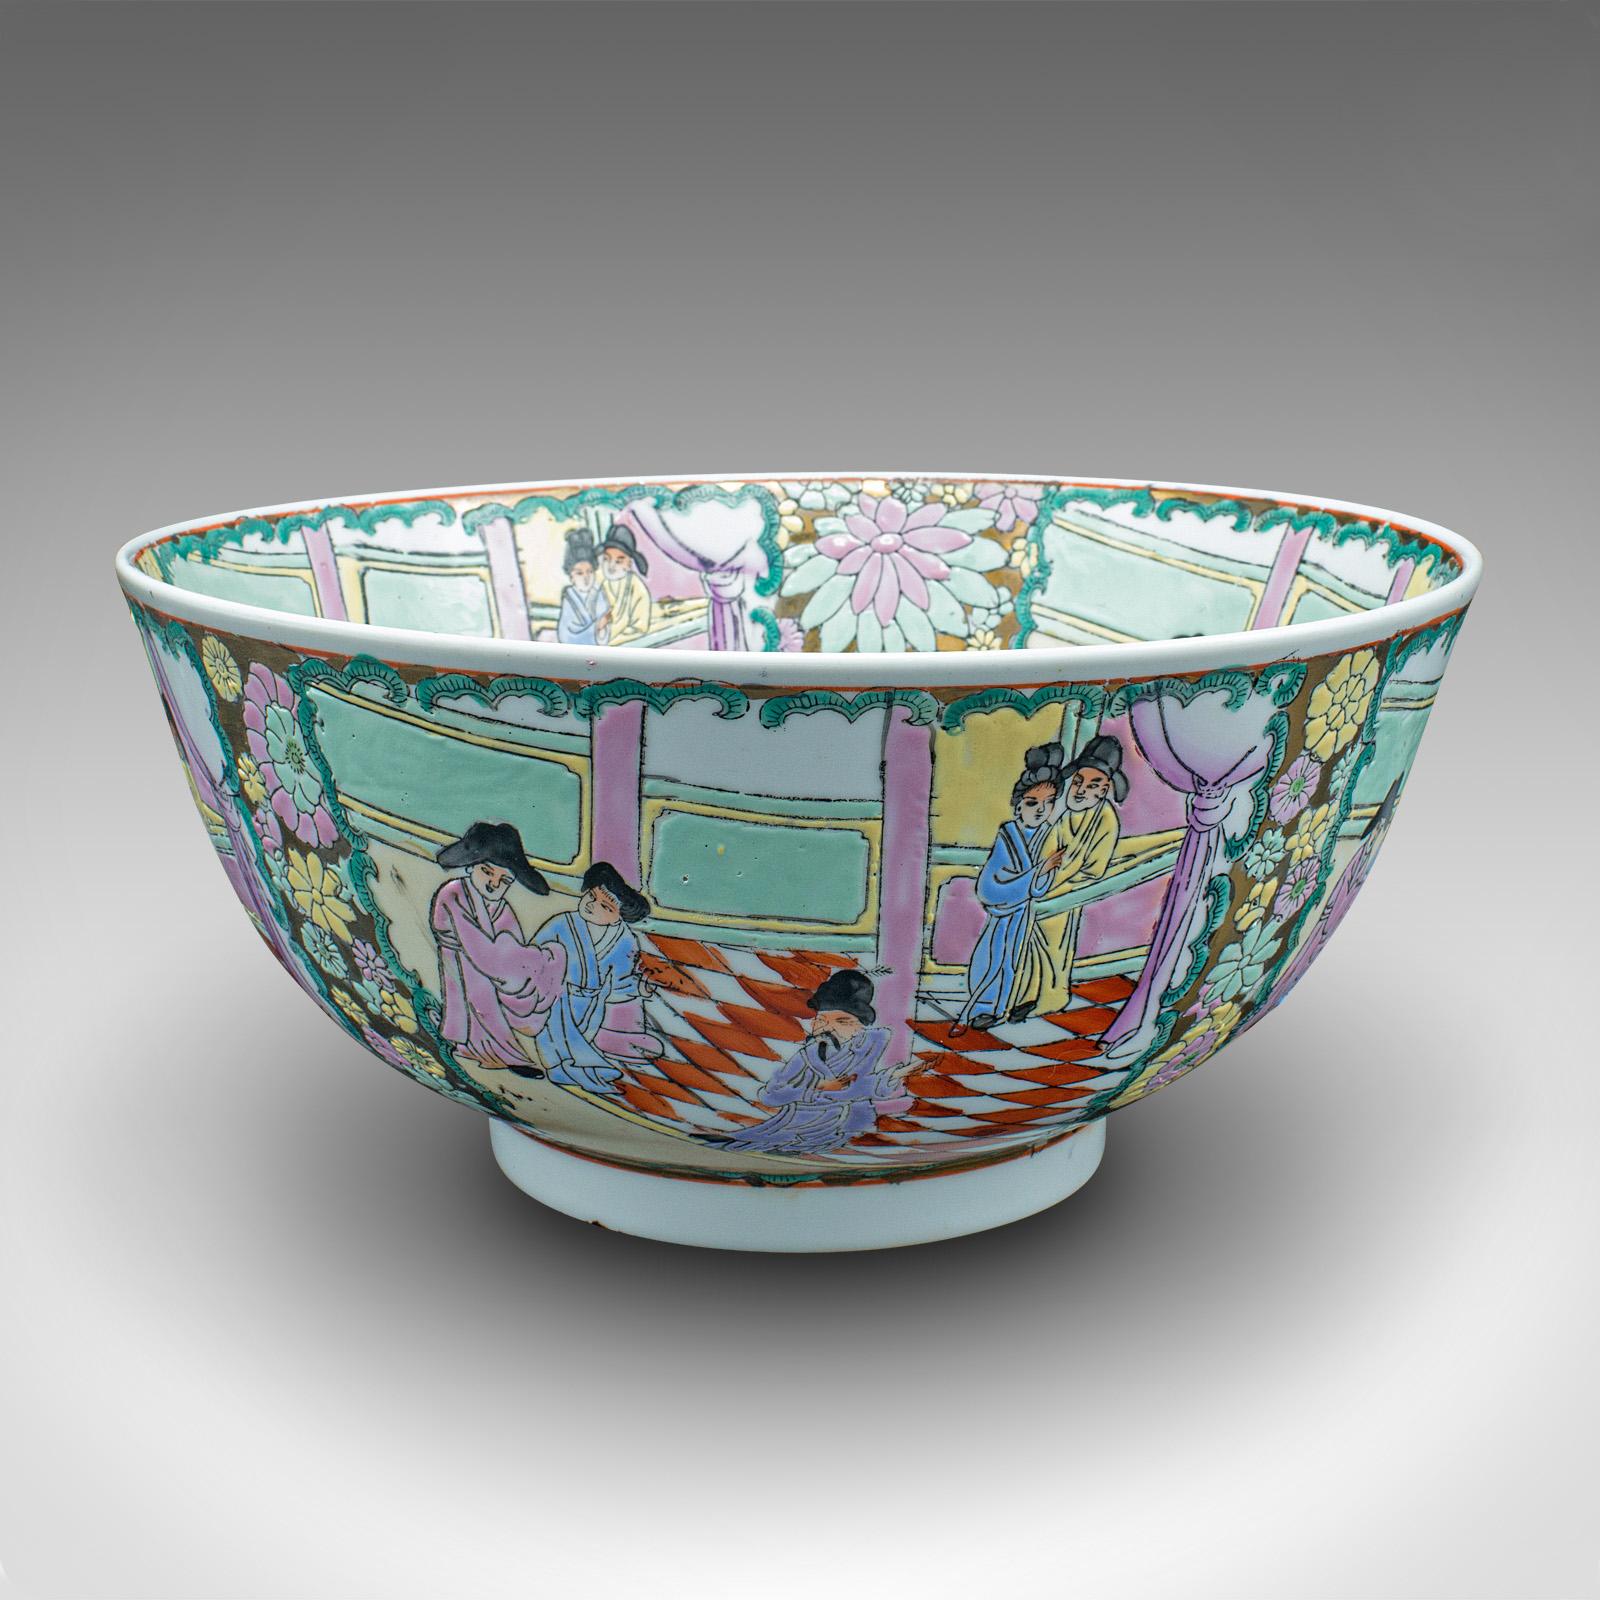 This is an antique decorative bowl. A Chinese, ceramic serving dish, dating to the late Victorian period, circa 1900.

Profusely decorated with delightful colours in a wonderfully traditional manner
Displays a desirable aged patina and in good